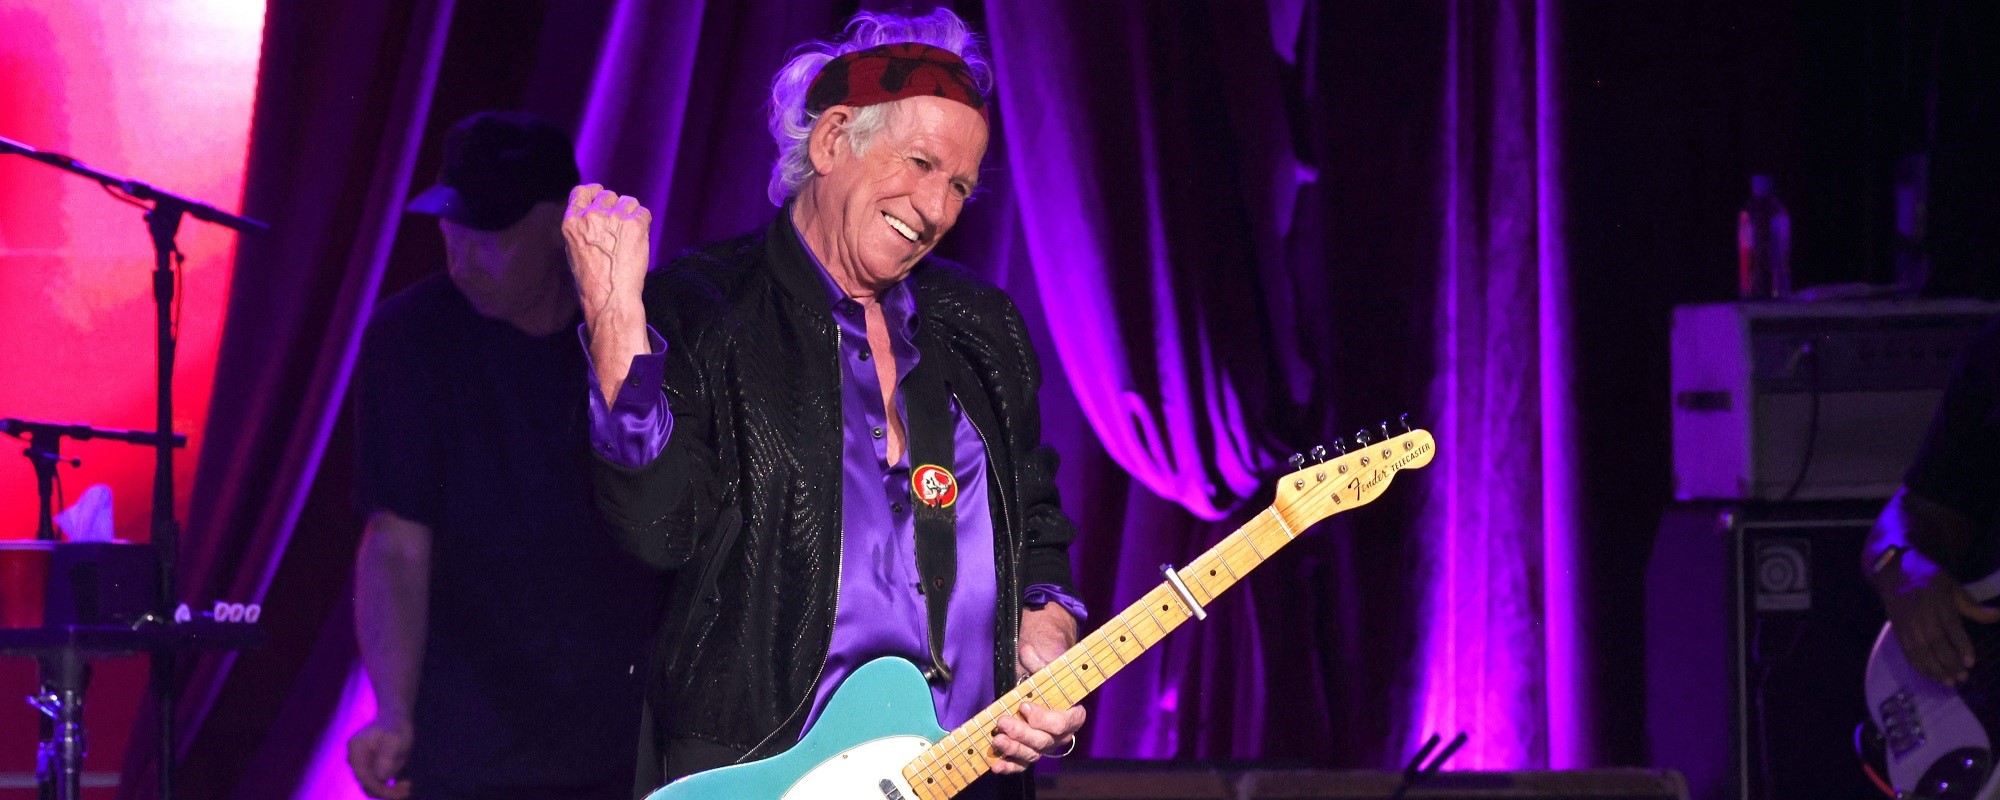 Read Tom Waits’ Poem in Honor of Keith Richards’ 80th Birthday: “Burnt Toast to Keith”